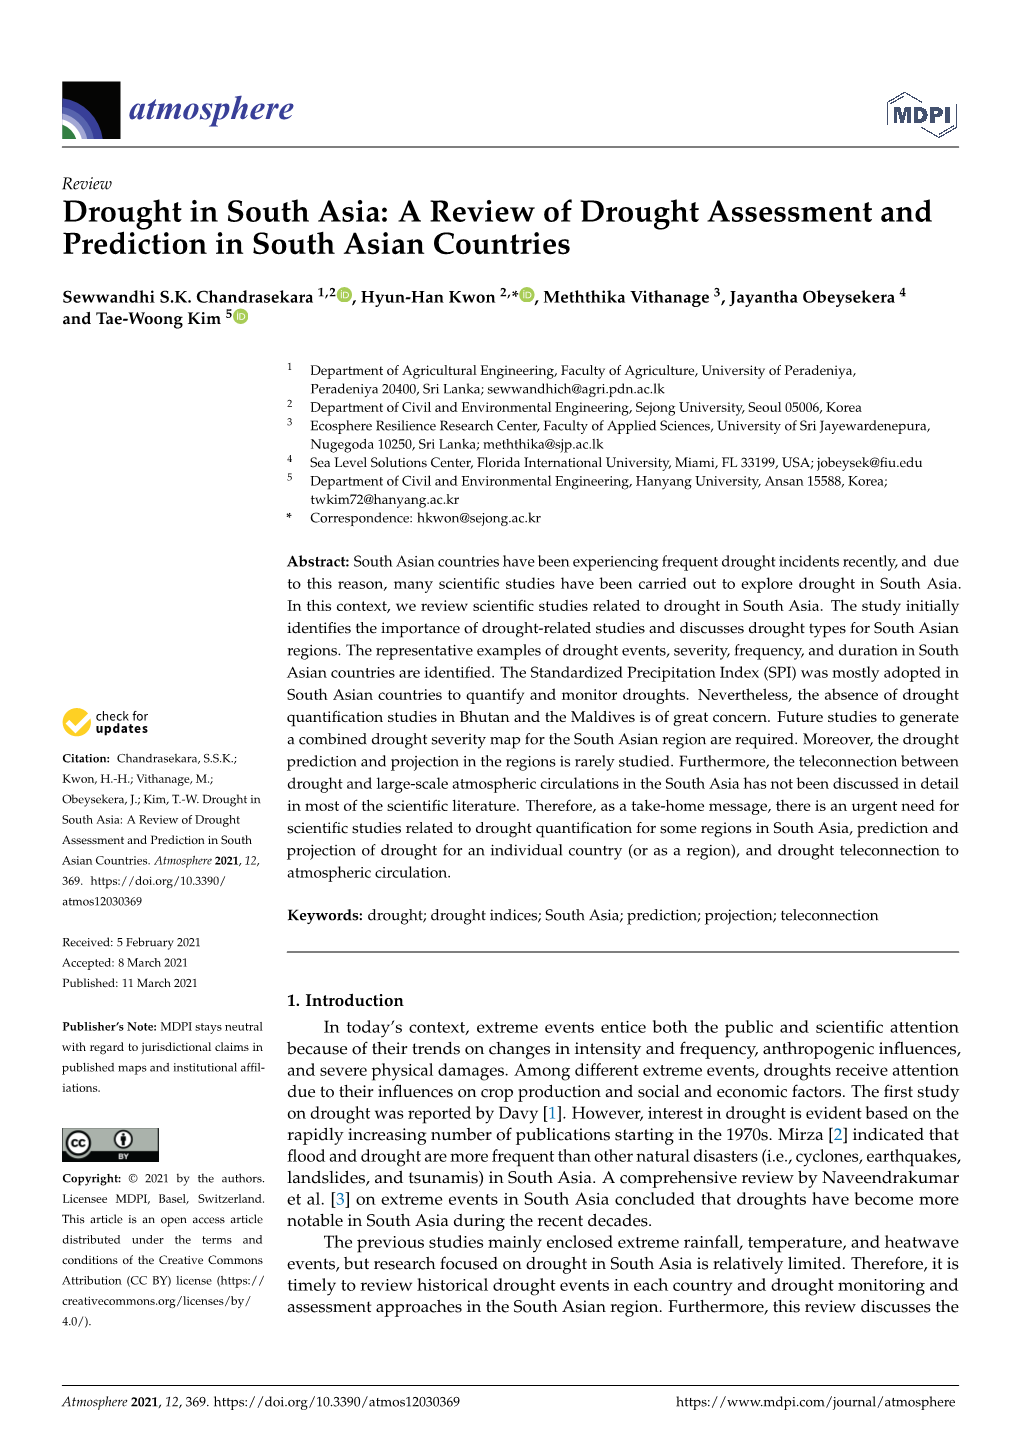 A Review of Drought Assessment and Prediction in South Asian Countries